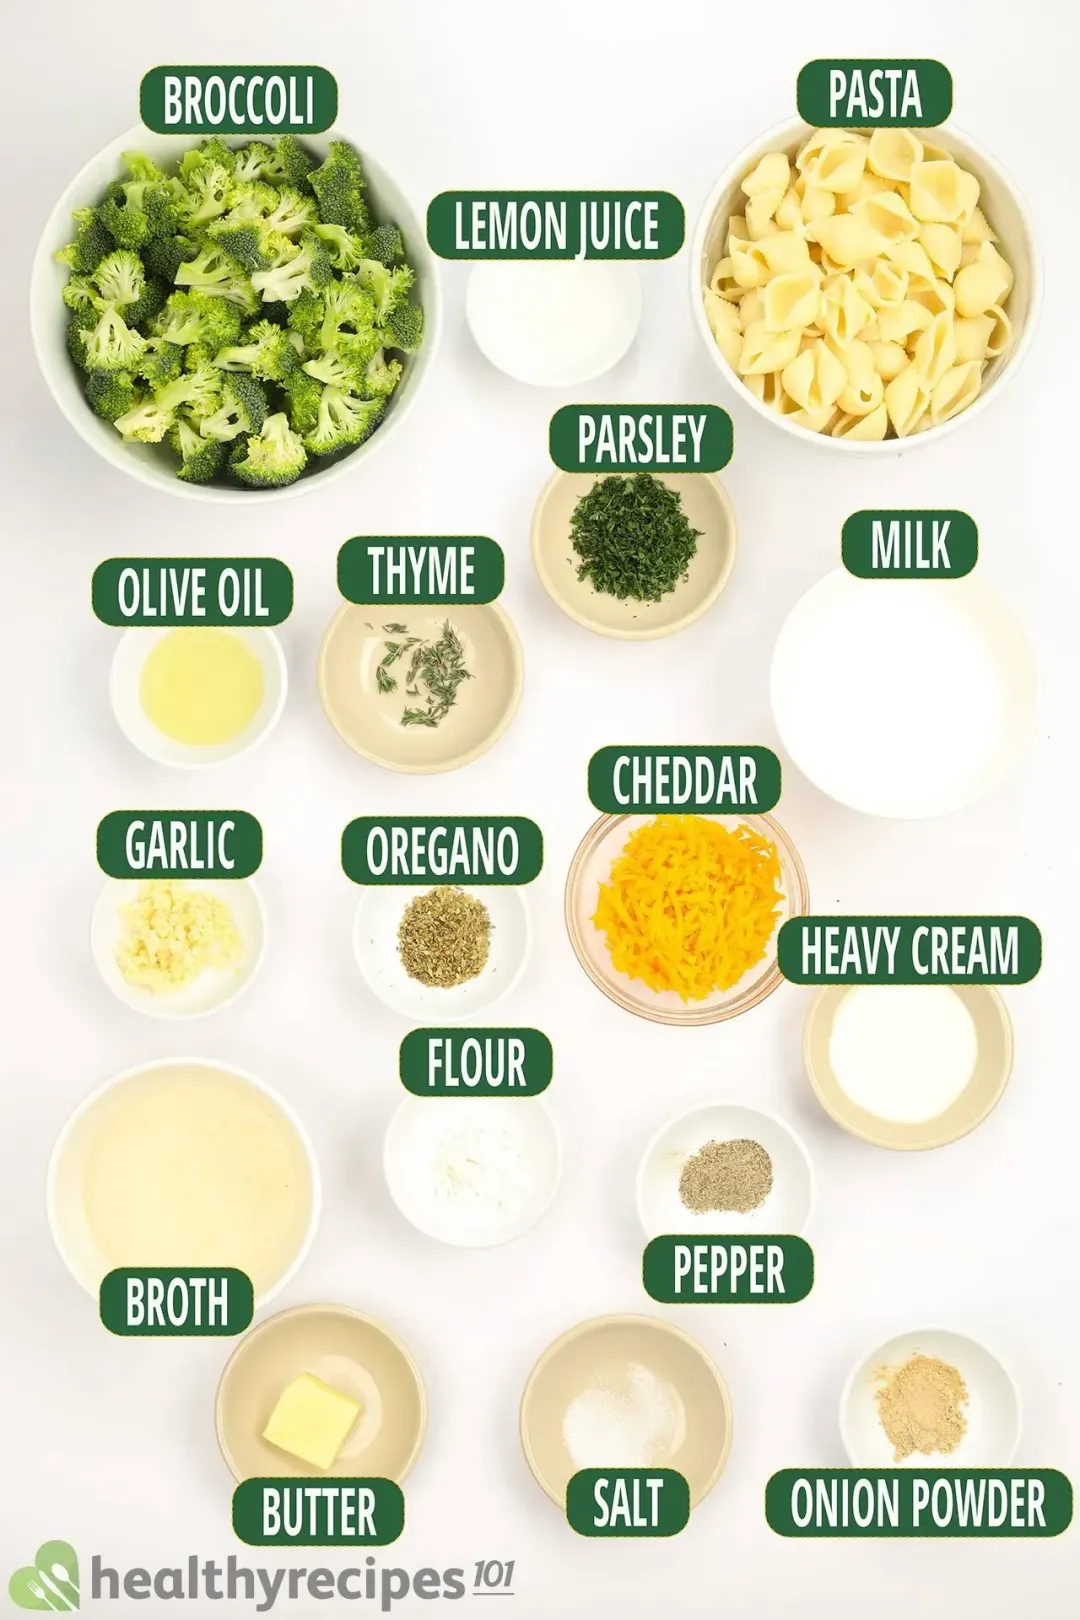 Ingredients for Broccoli Pasta